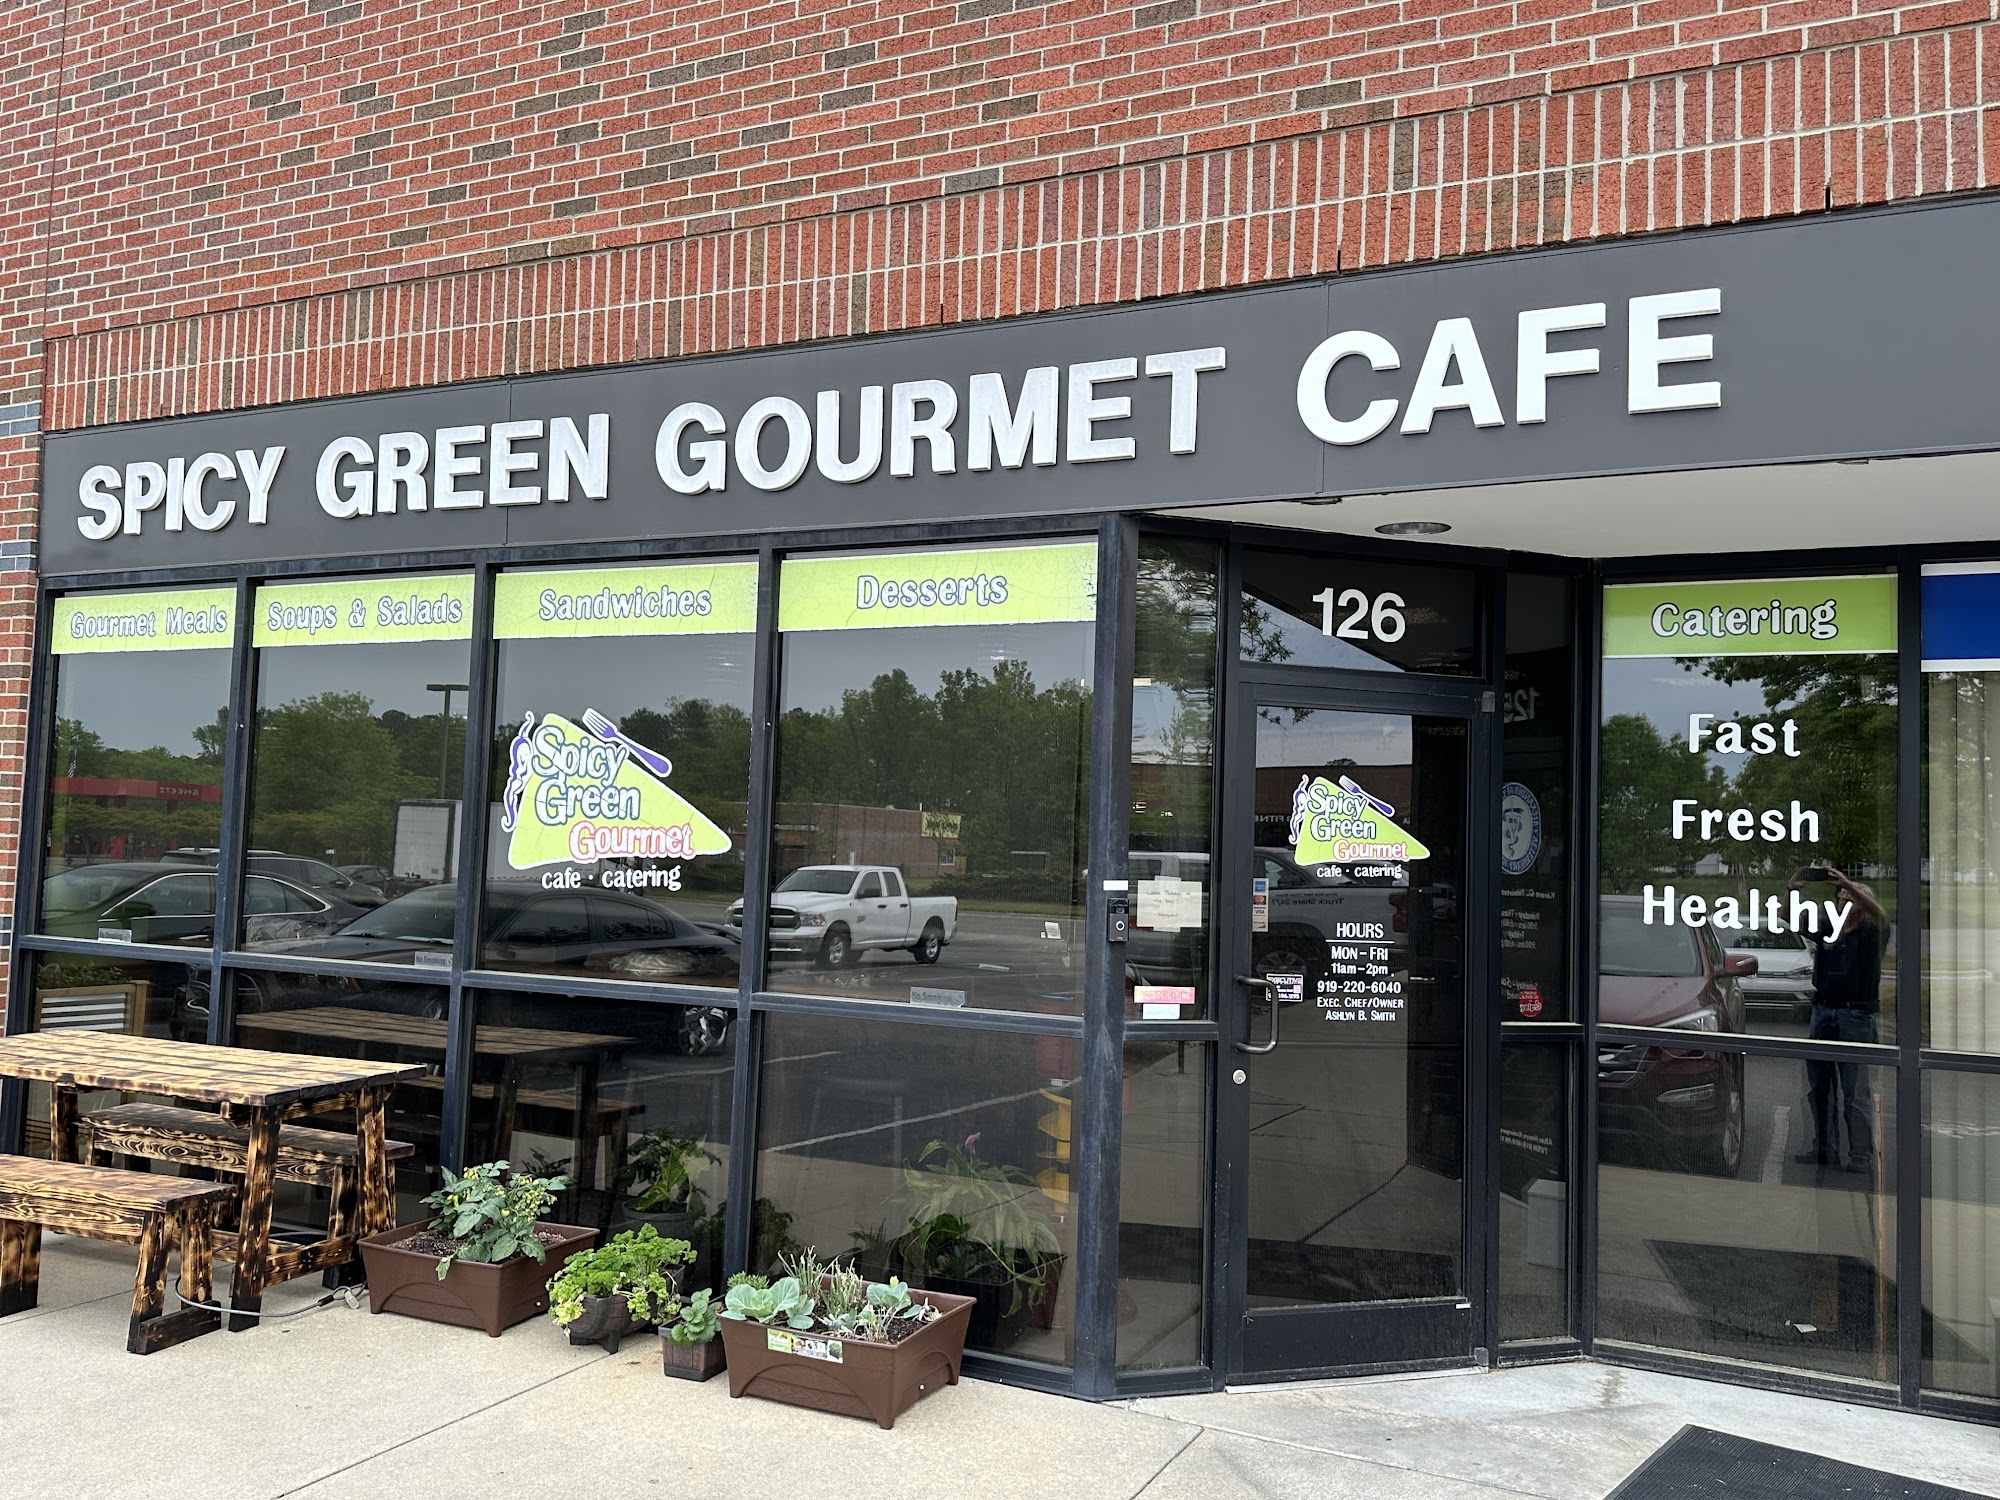 Spicy Green Gourmet Café & Catering